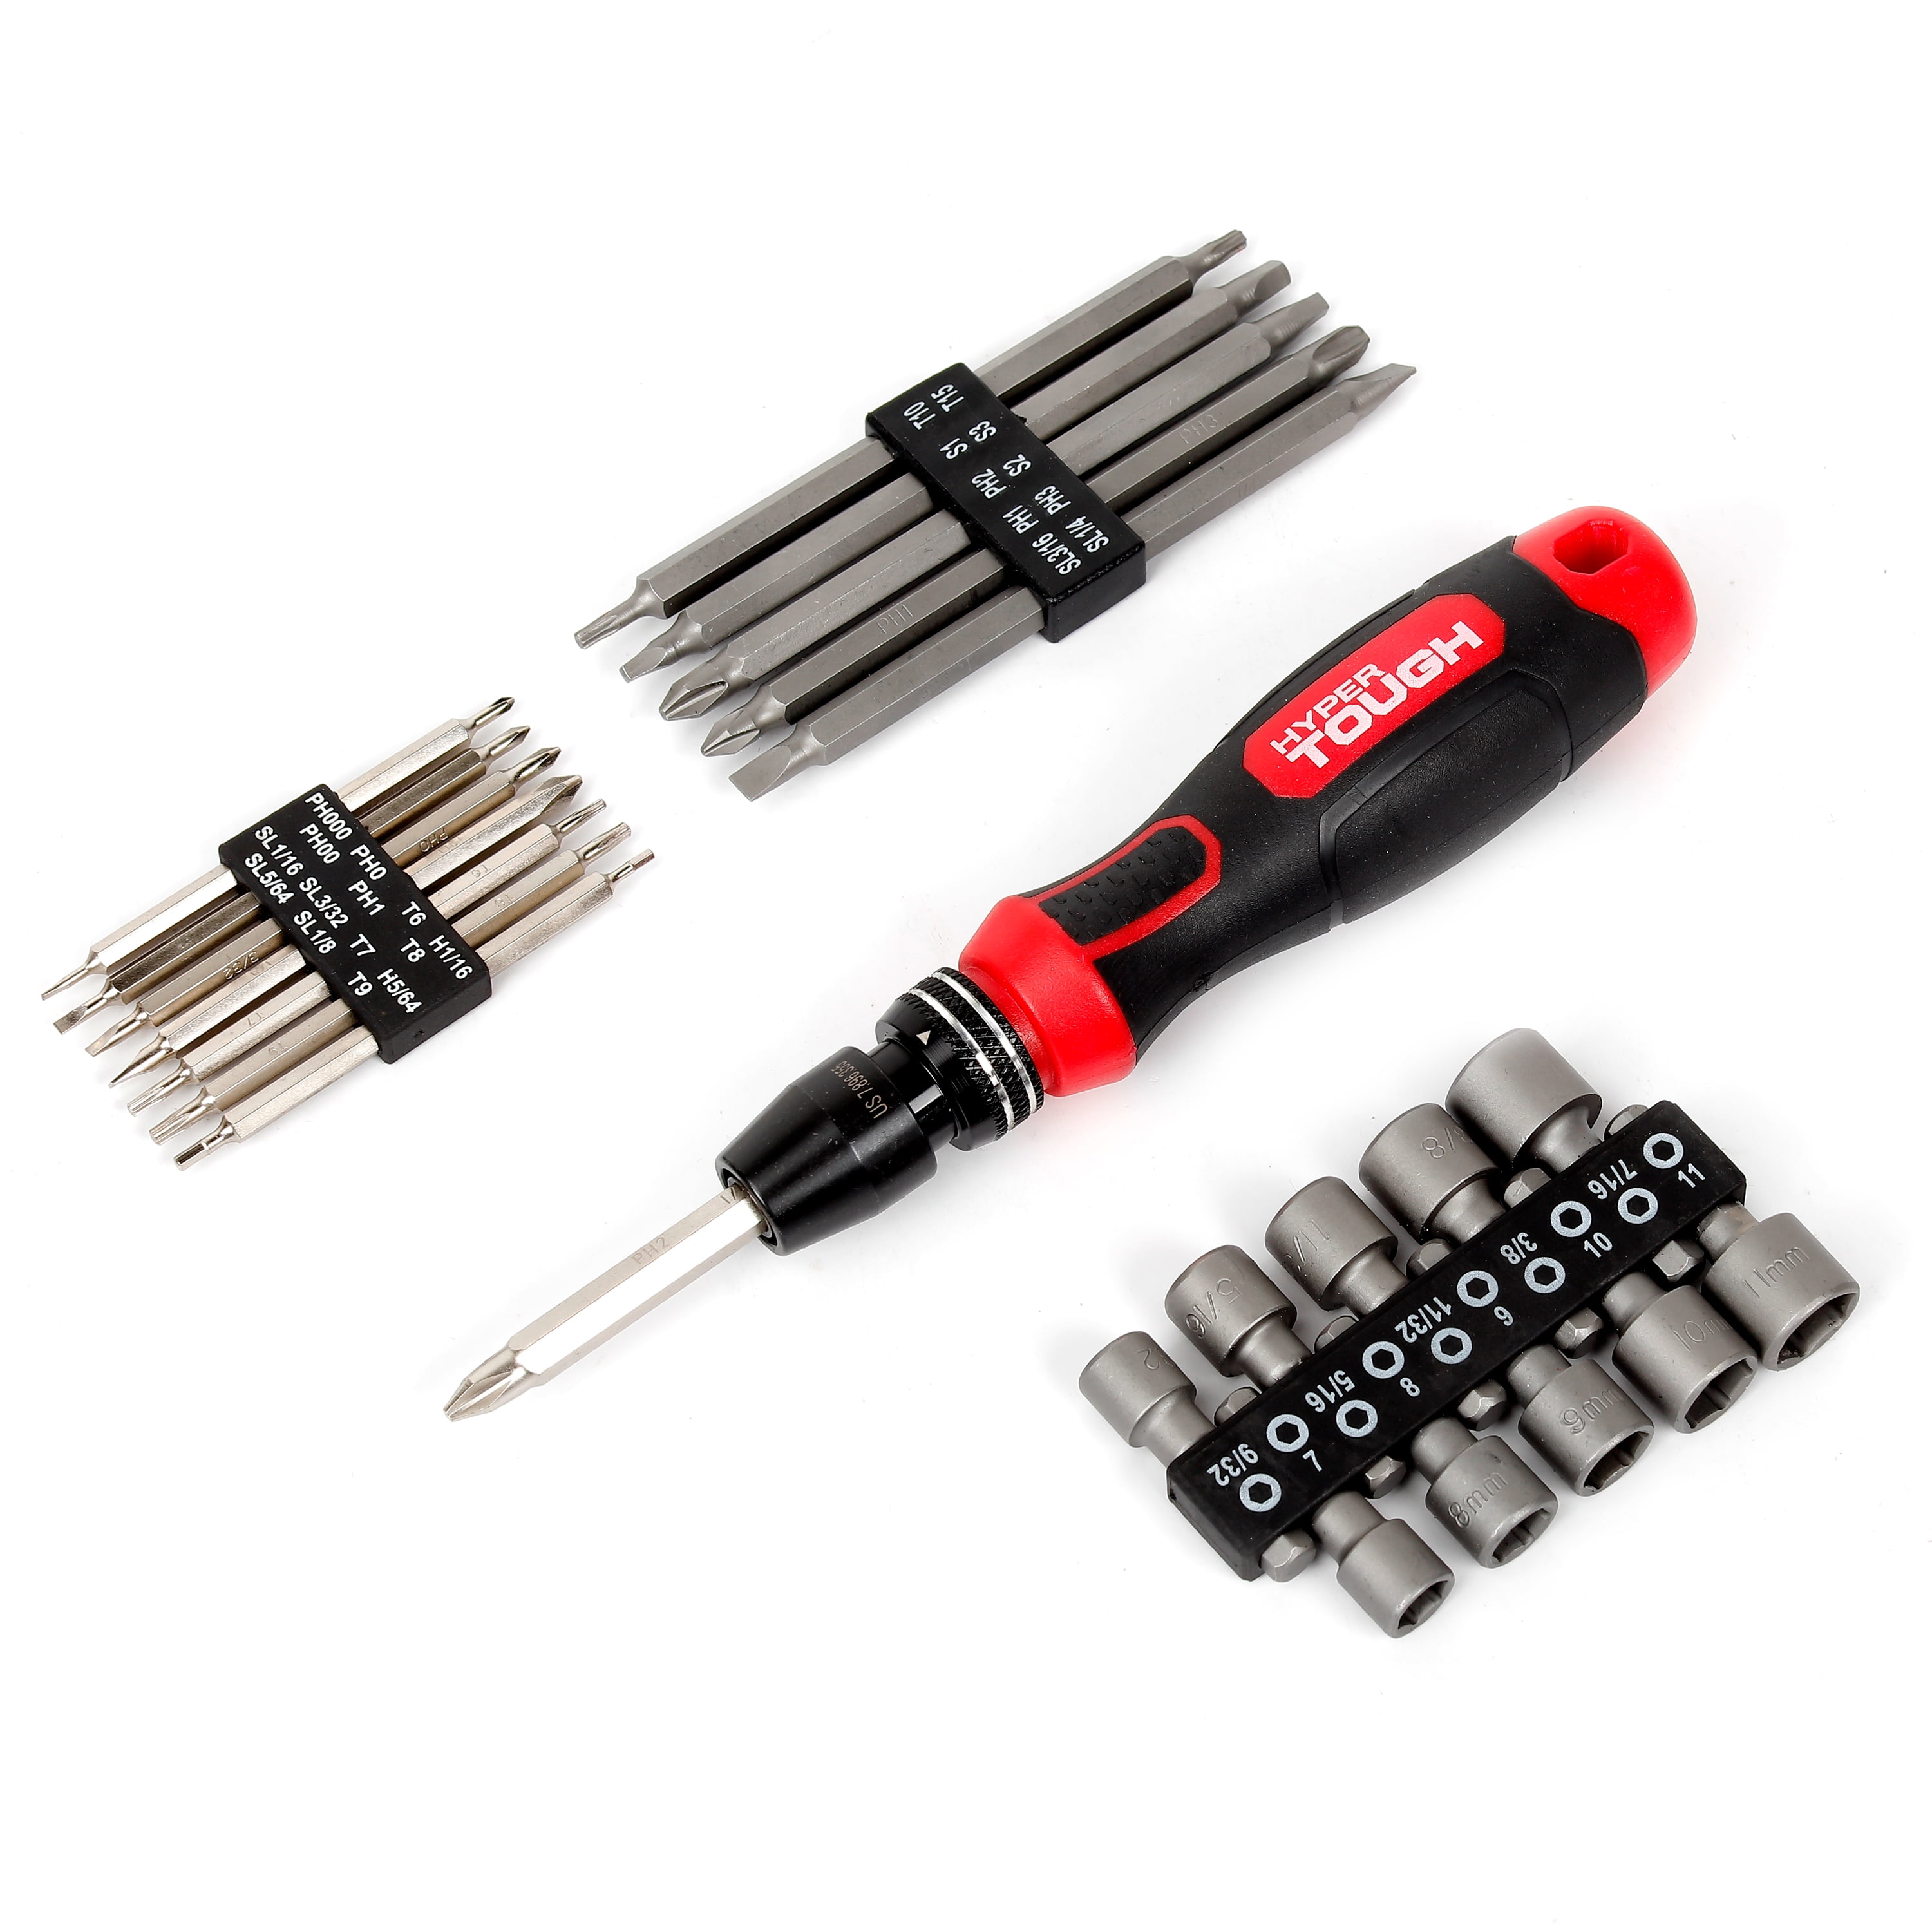 HOTO Precision Screwdriver Sets, 24-in-1 Manual Screwdriver, 24 pcs Tough  S2 Steel Bits, Manual Pen Shape, Ideal for Electronics, Glasses and